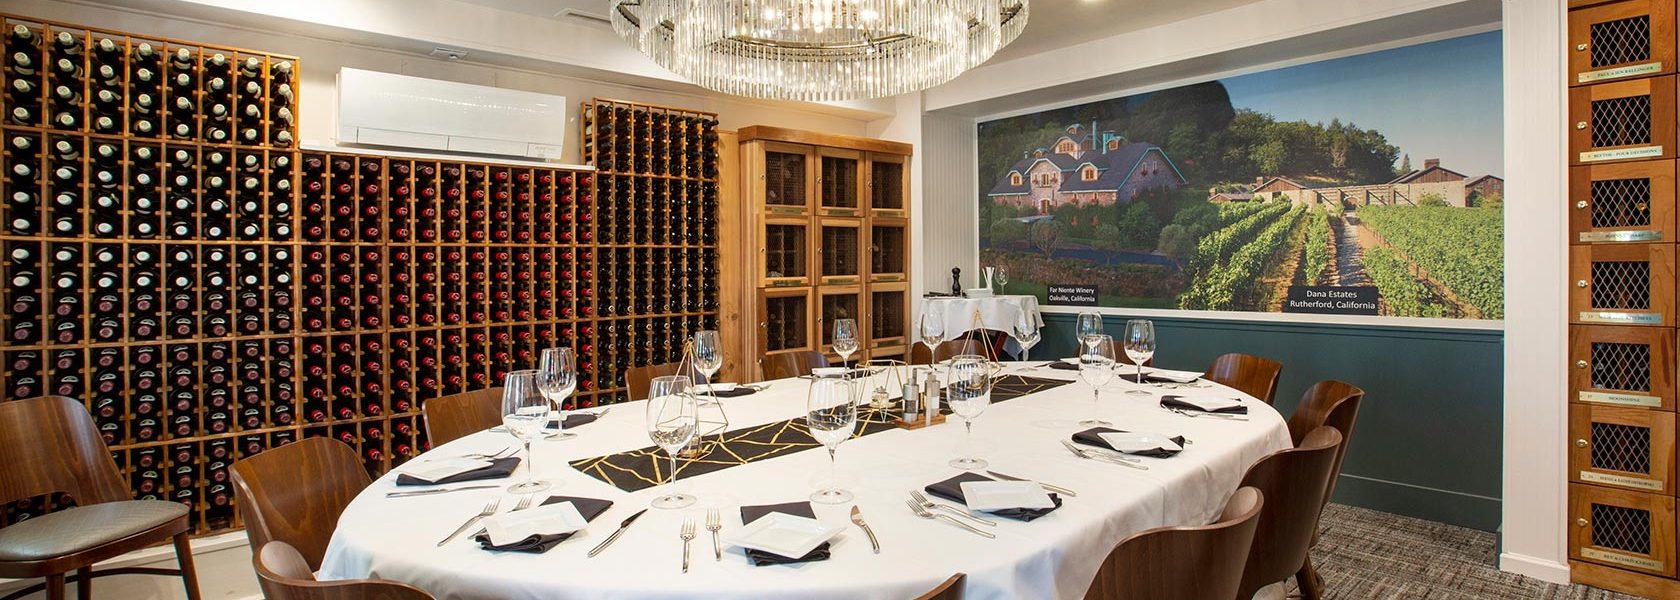 Private dining room with wine cellar, glass chandelier and table set for 12.